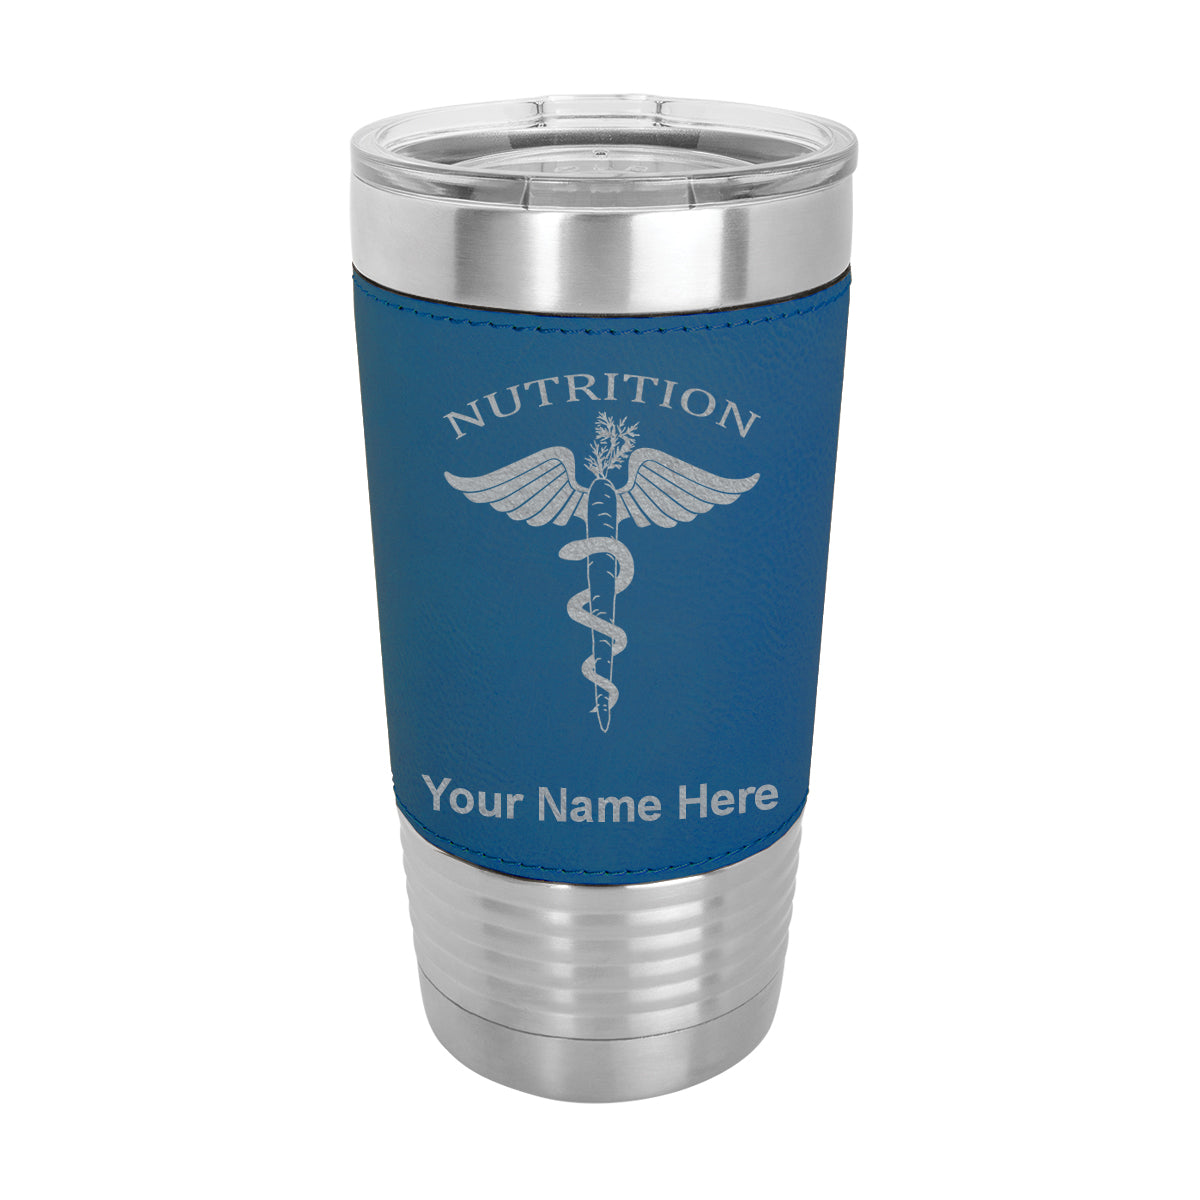 20oz Faux Leather Tumbler Mug, Nutritionist, Personalized Engraving Included - LaserGram Custom Engraved Gifts